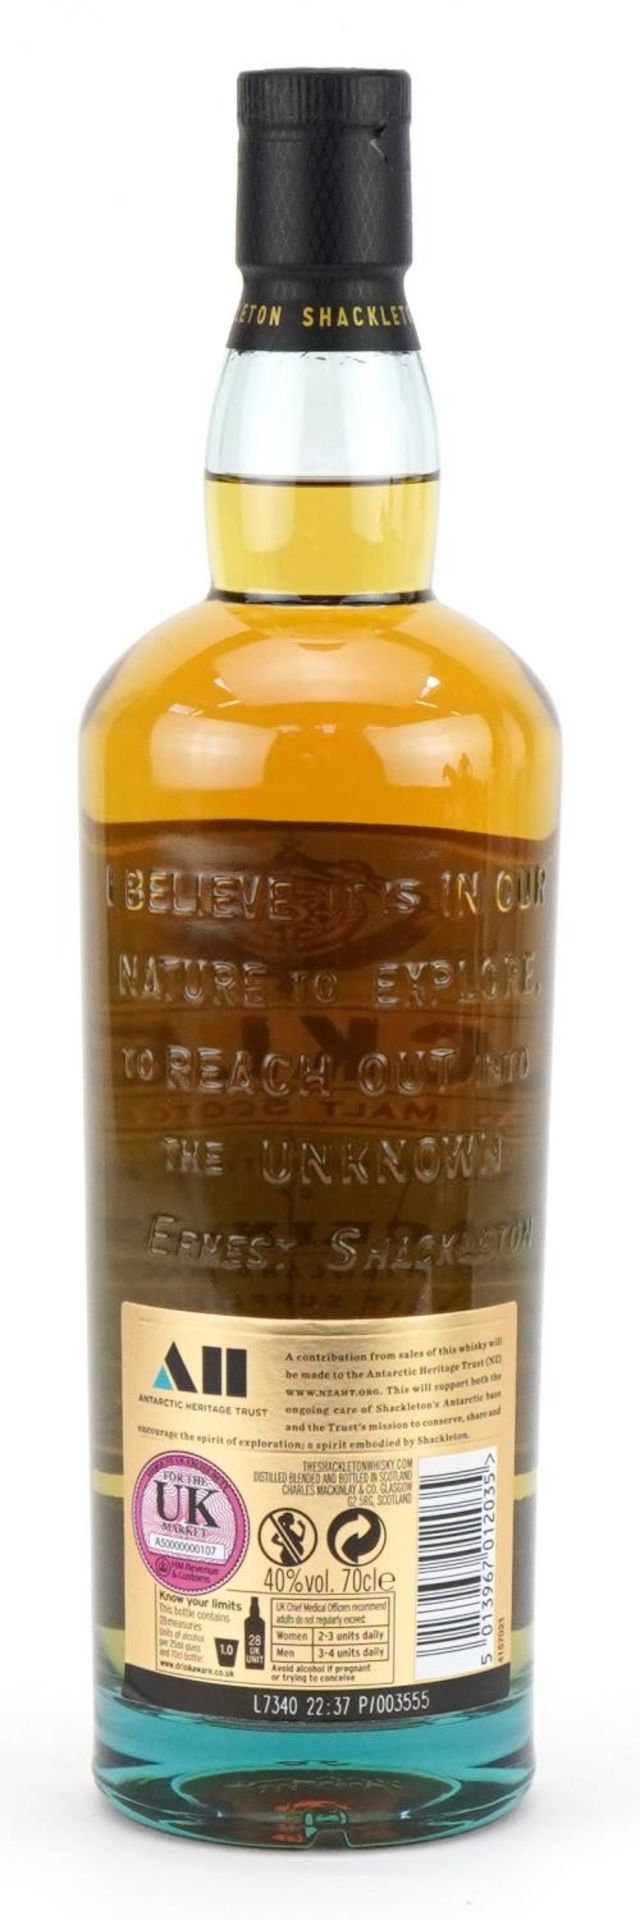 Bottle of Shackleton Blended Malt Scotch whisky with box, British Antarctic Expedition : For further - Image 2 of 2